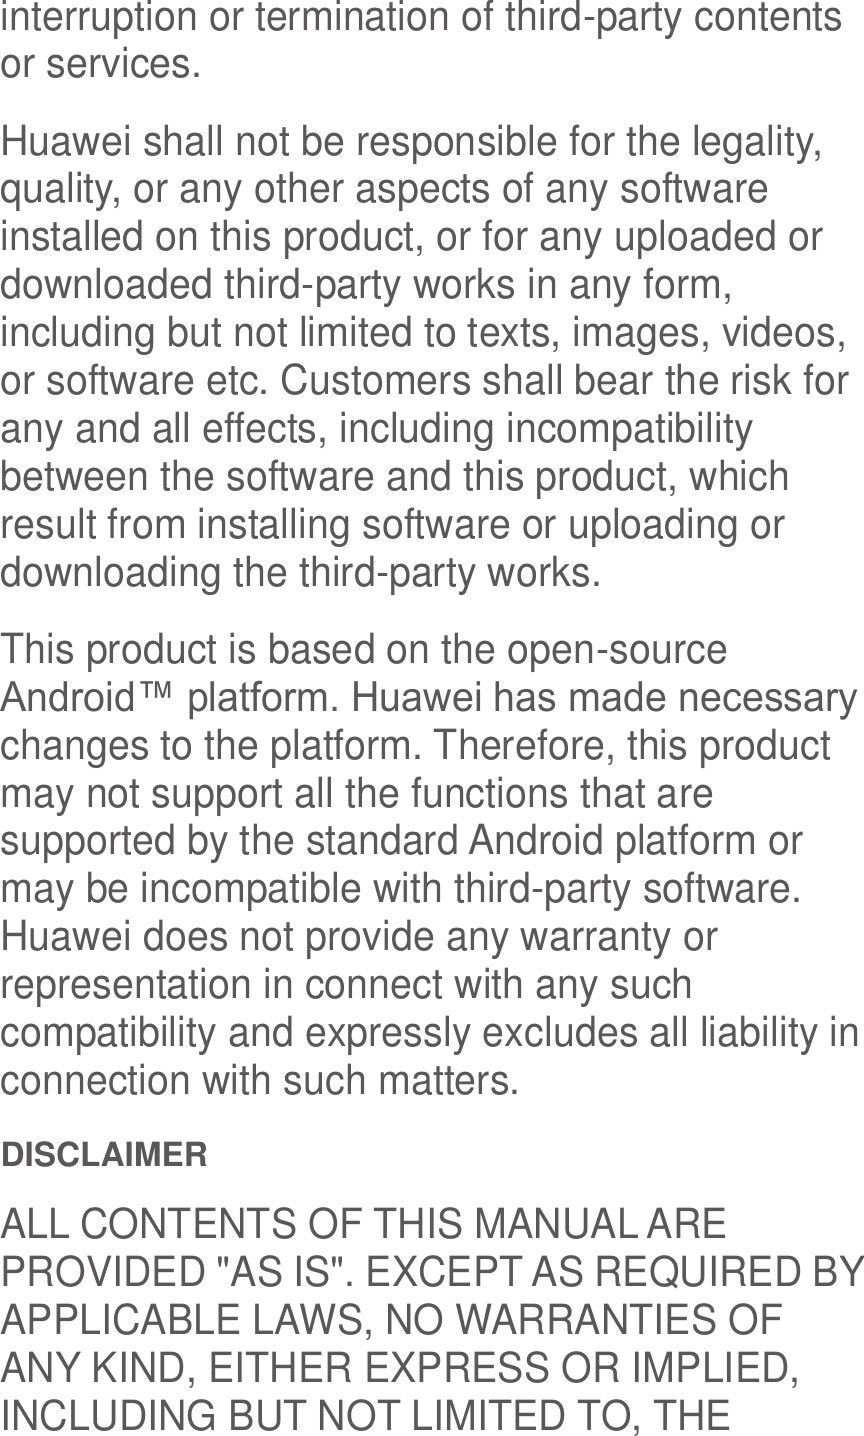  interruption or termination of third-party contents or services. Huawei shall not be responsible for the legality, quality, or any other aspects of any software installed on this product, or for any uploaded or downloaded third-party works in any form, including but not limited to texts, images, videos, or software etc. Customers shall bear the risk for any and all effects, including incompatibility between the software and this product, which result from installing software or uploading or downloading the third-party works. This product is based on the open-source Android™ platform. Huawei has made necessary changes to the platform. Therefore, this product may not support all the functions that are supported by the standard Android platform or may be incompatible with third-party software. Huawei does not provide any warranty or representation in connect with any such compatibility and expressly excludes all liability in connection with such matters. DISCLAIMER ALL CONTENTS OF THIS MANUAL ARE PROVIDED &quot;AS IS&quot;. EXCEPT AS REQUIRED BY APPLICABLE LAWS, NO WARRANTIES OF ANY KIND, EITHER EXPRESS OR IMPLIED, INCLUDING BUT NOT LIMITED TO, THE 